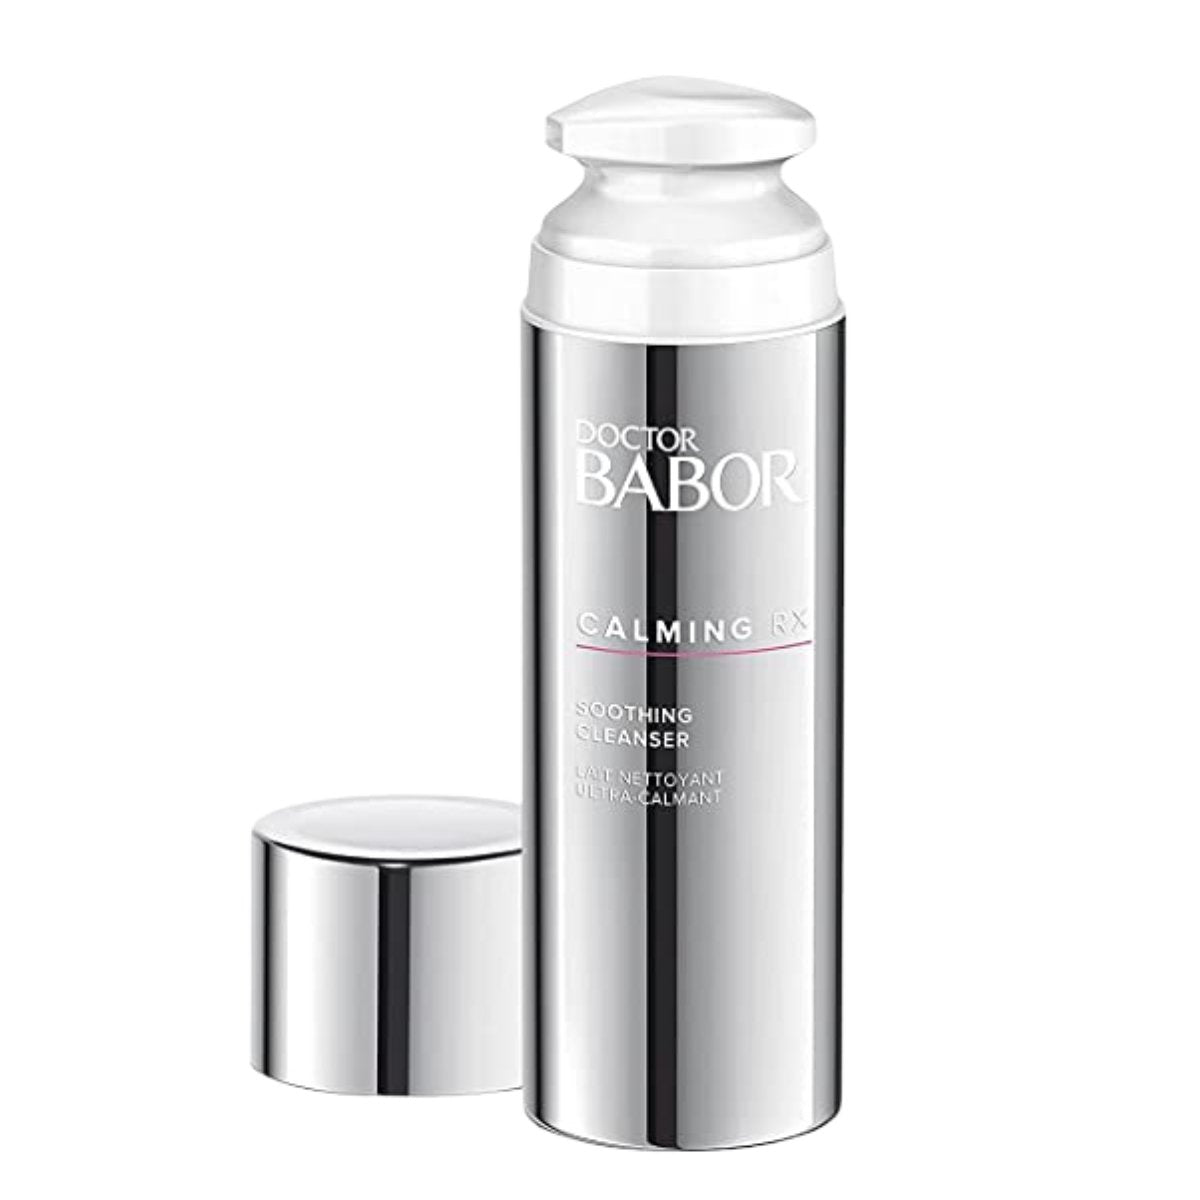 Babor - Calming RX Soothing Cleanser 150ml